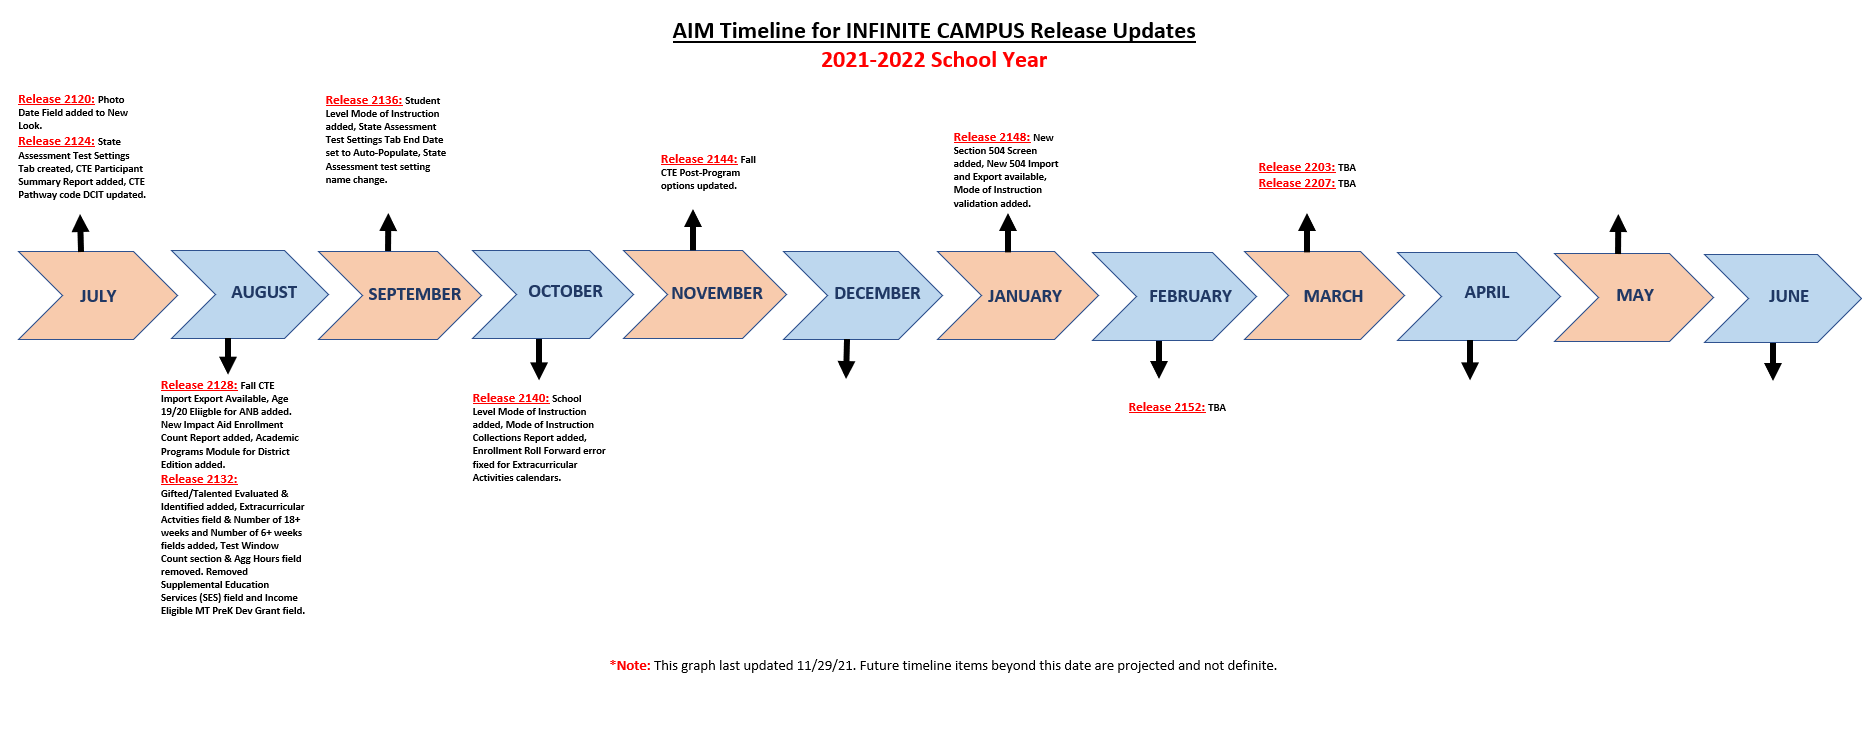 Horizontal Timeline showing release updates and corresponding month.